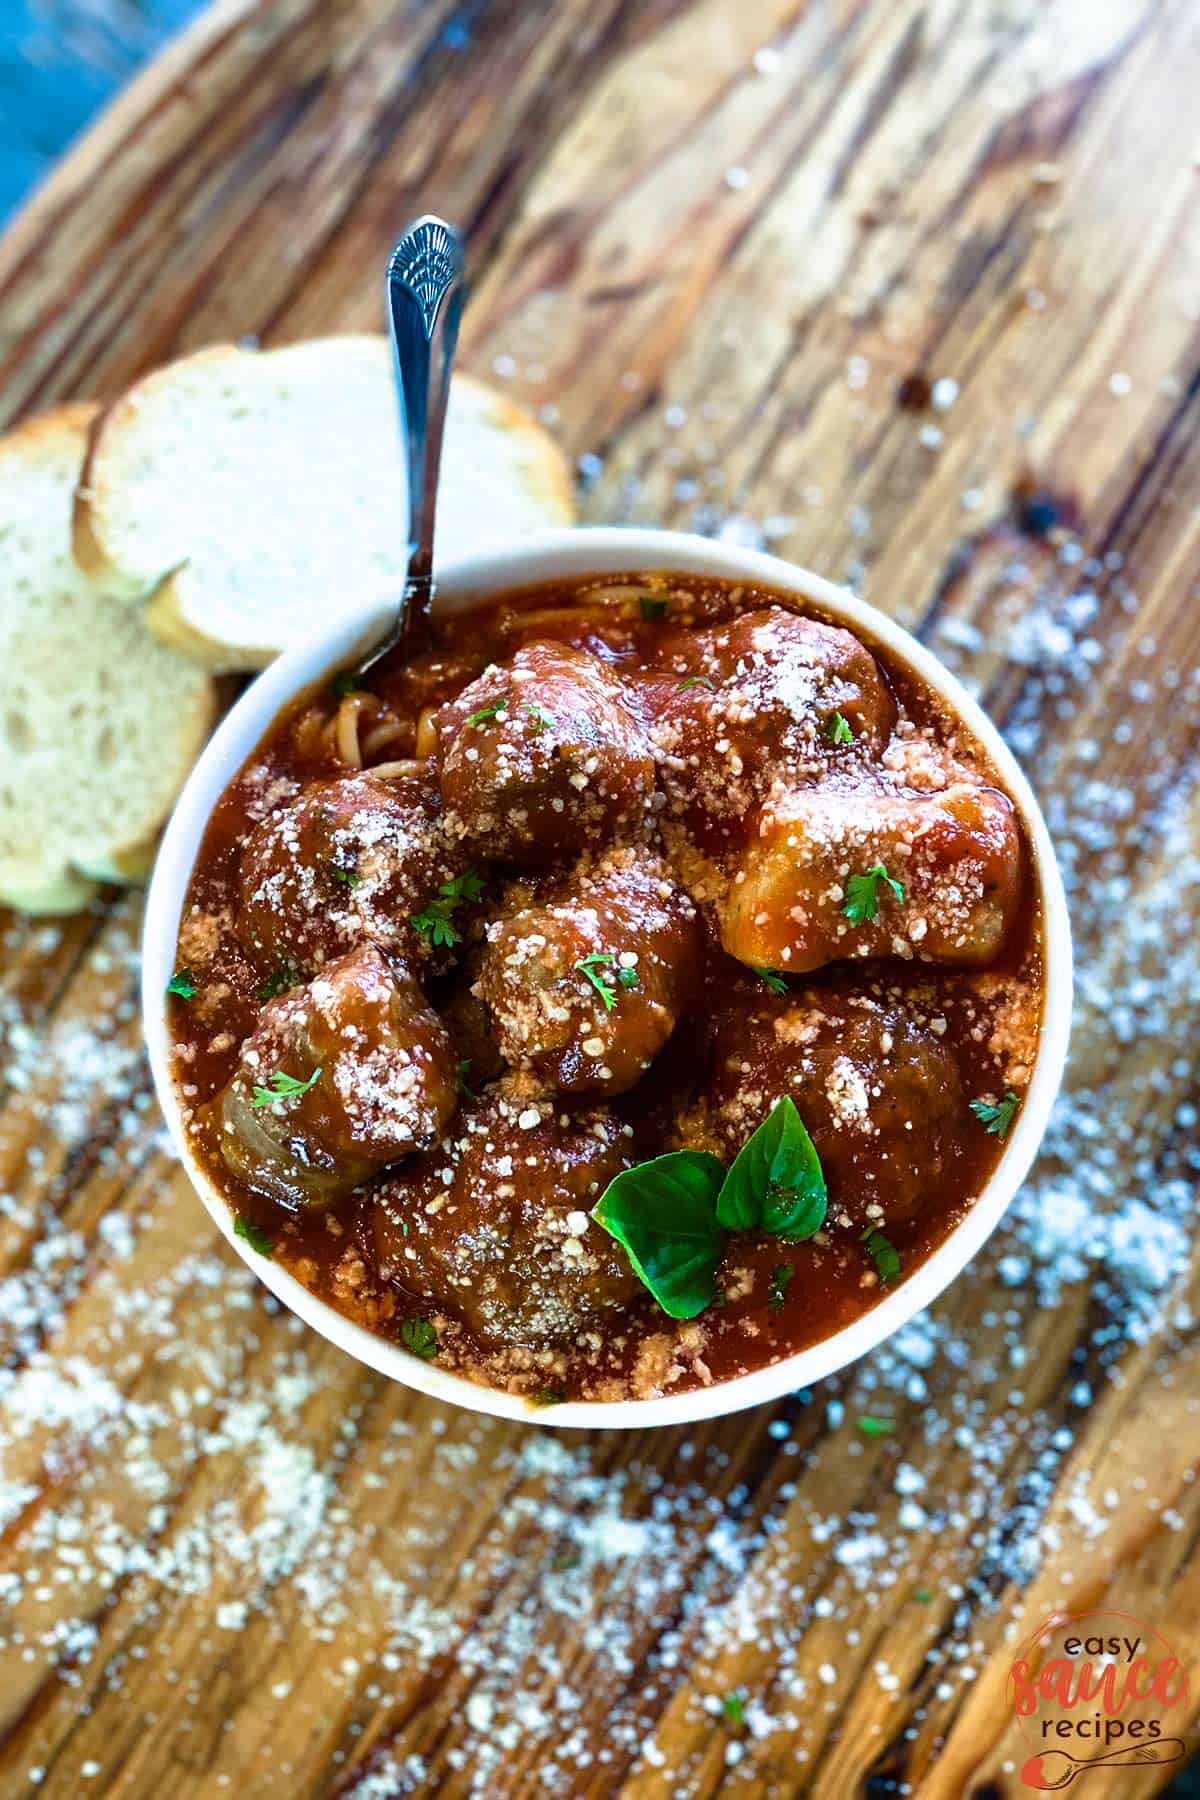 Meatball sauce with meatballs in a bowl next to bread